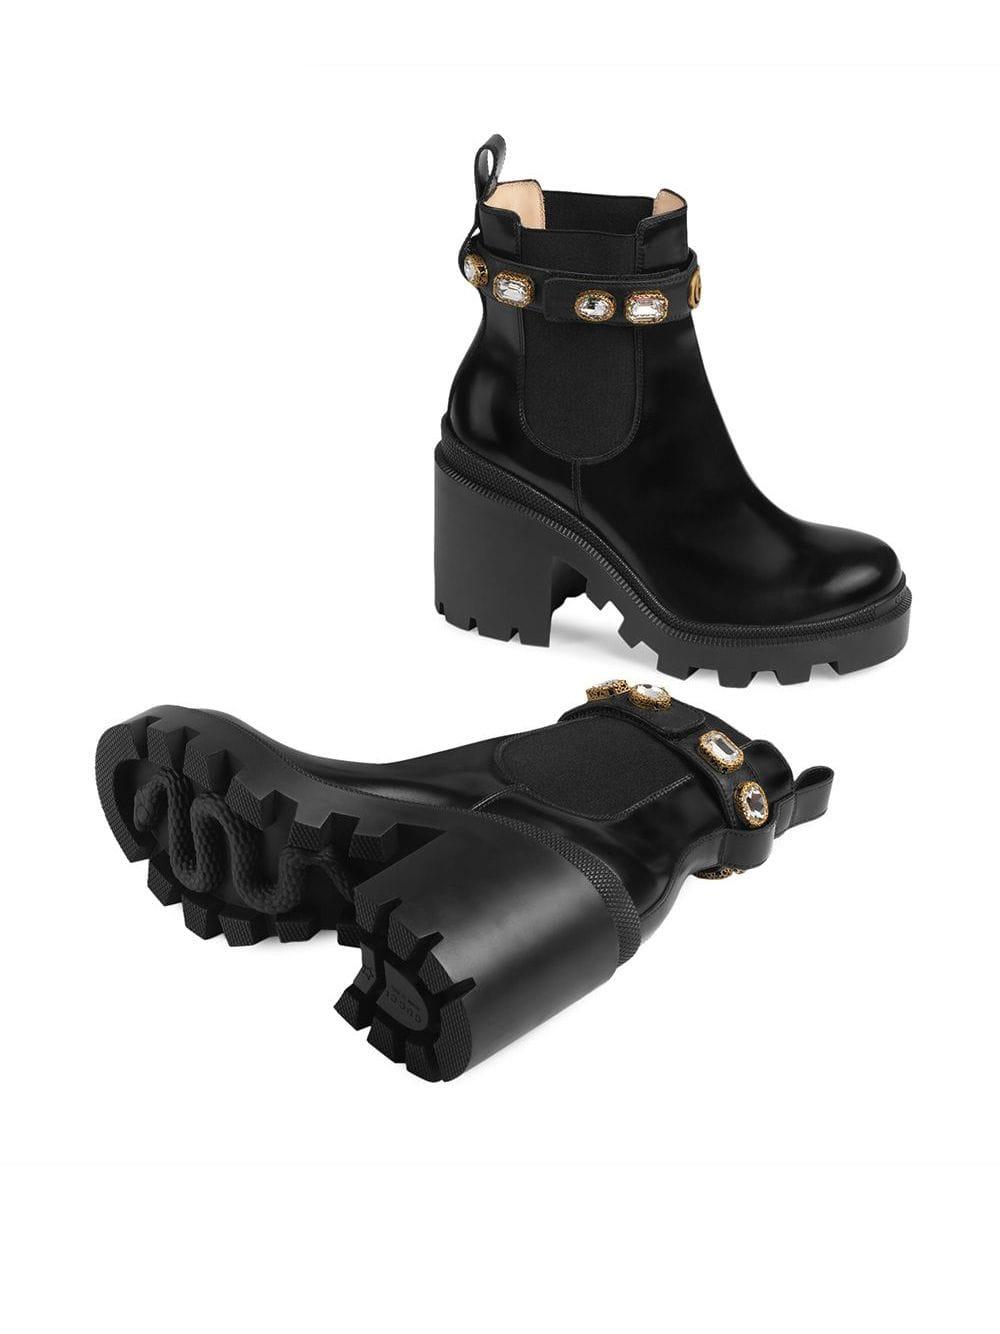 black leather gucci boots